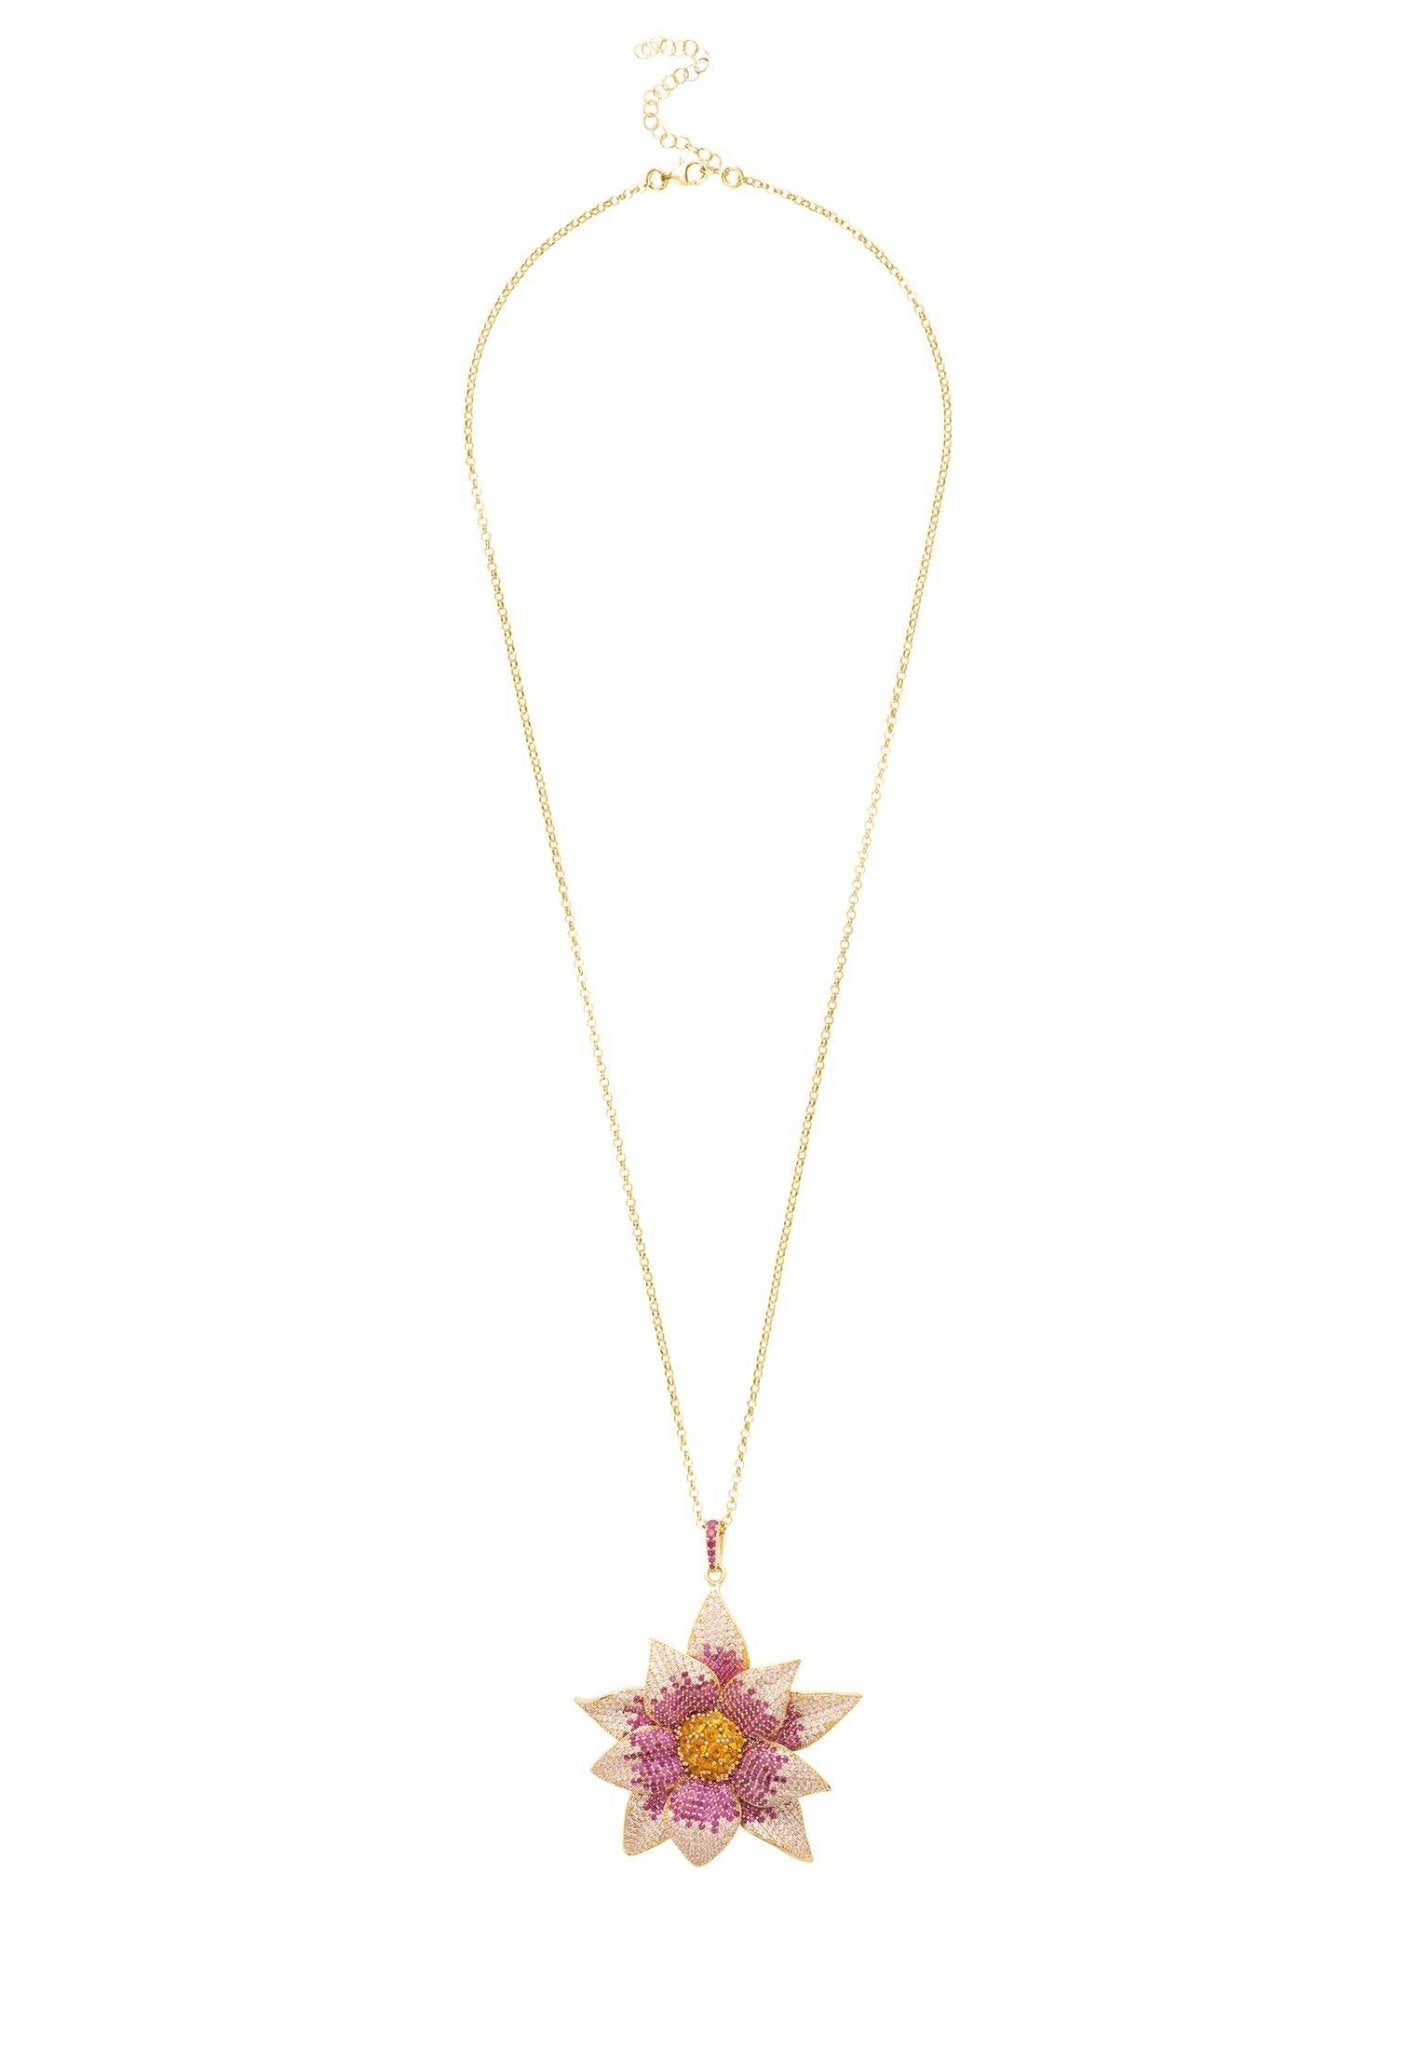 Daisy Flower Necklace Pink - LATELITA Necklaces